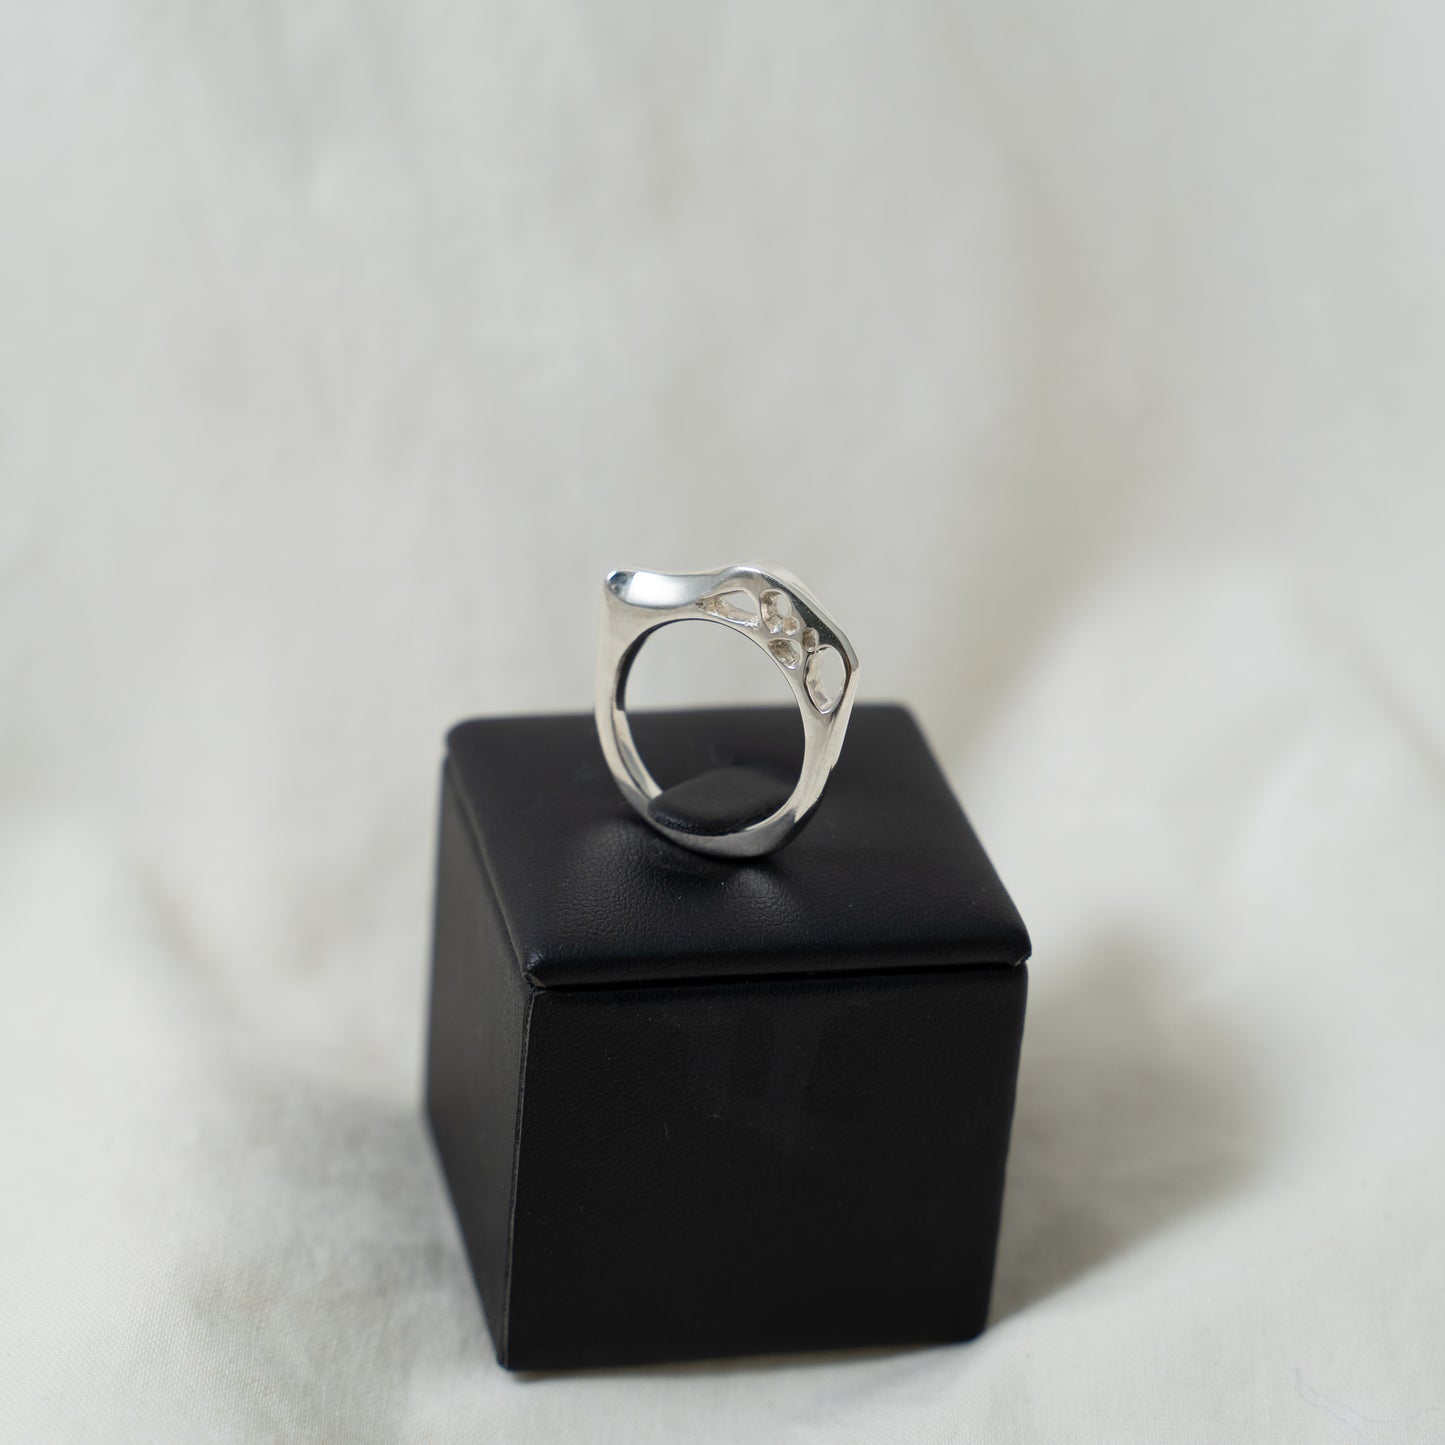 The holey silver signet ring